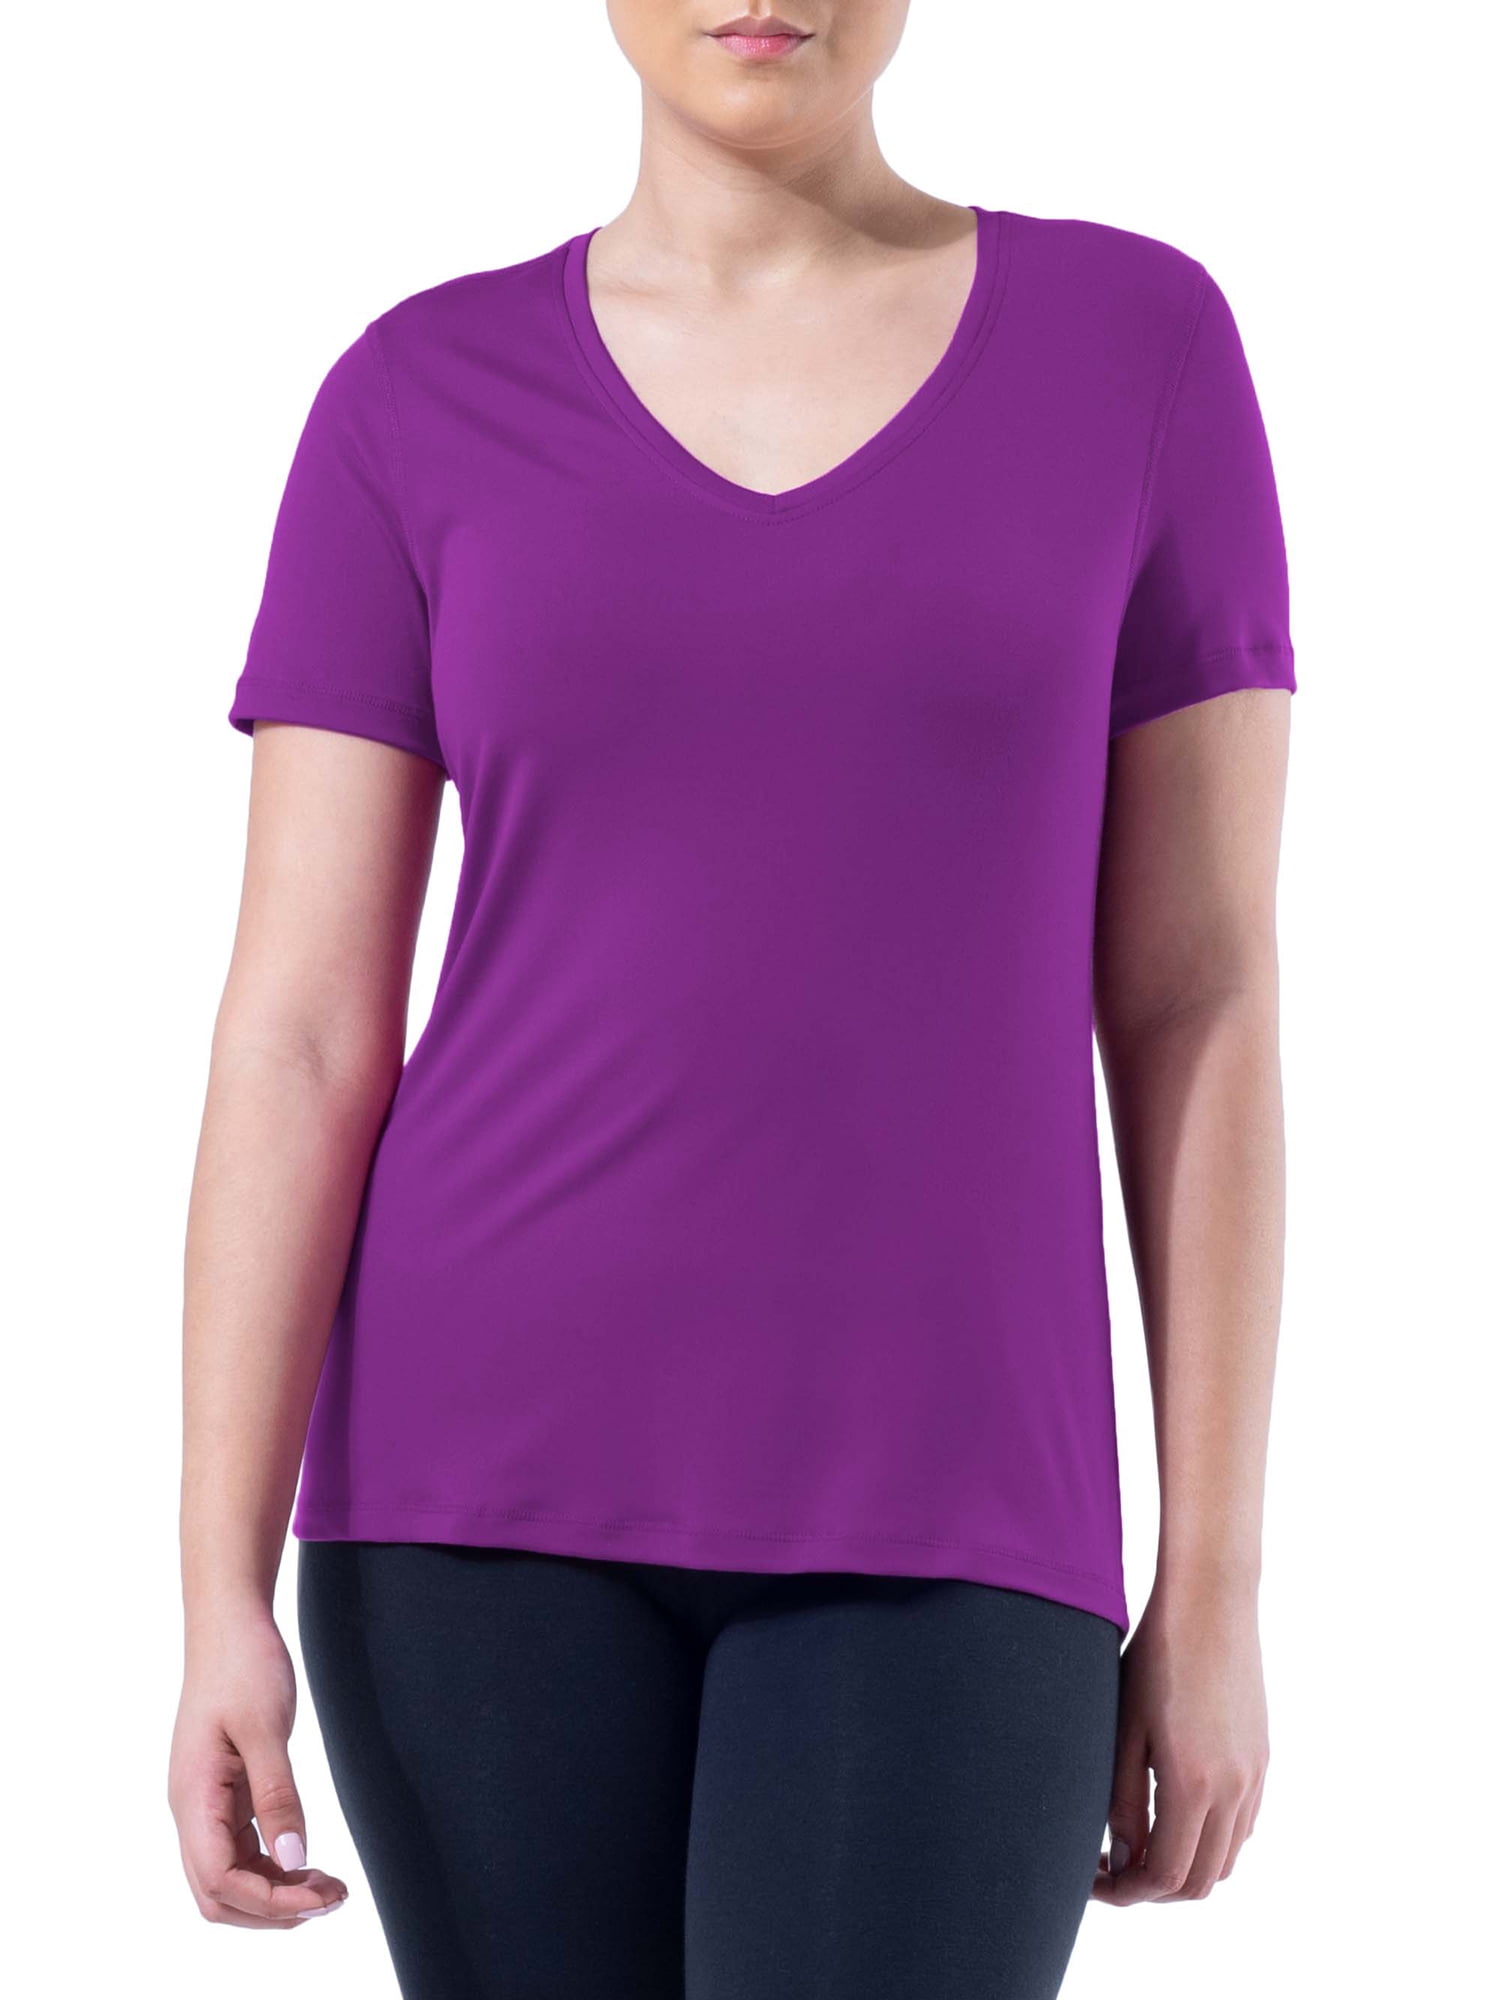 Athletic Works Women's Active V-Neck T-Shirt with Short Sleeves, 2-Pack,  Sizes XS-XXXL